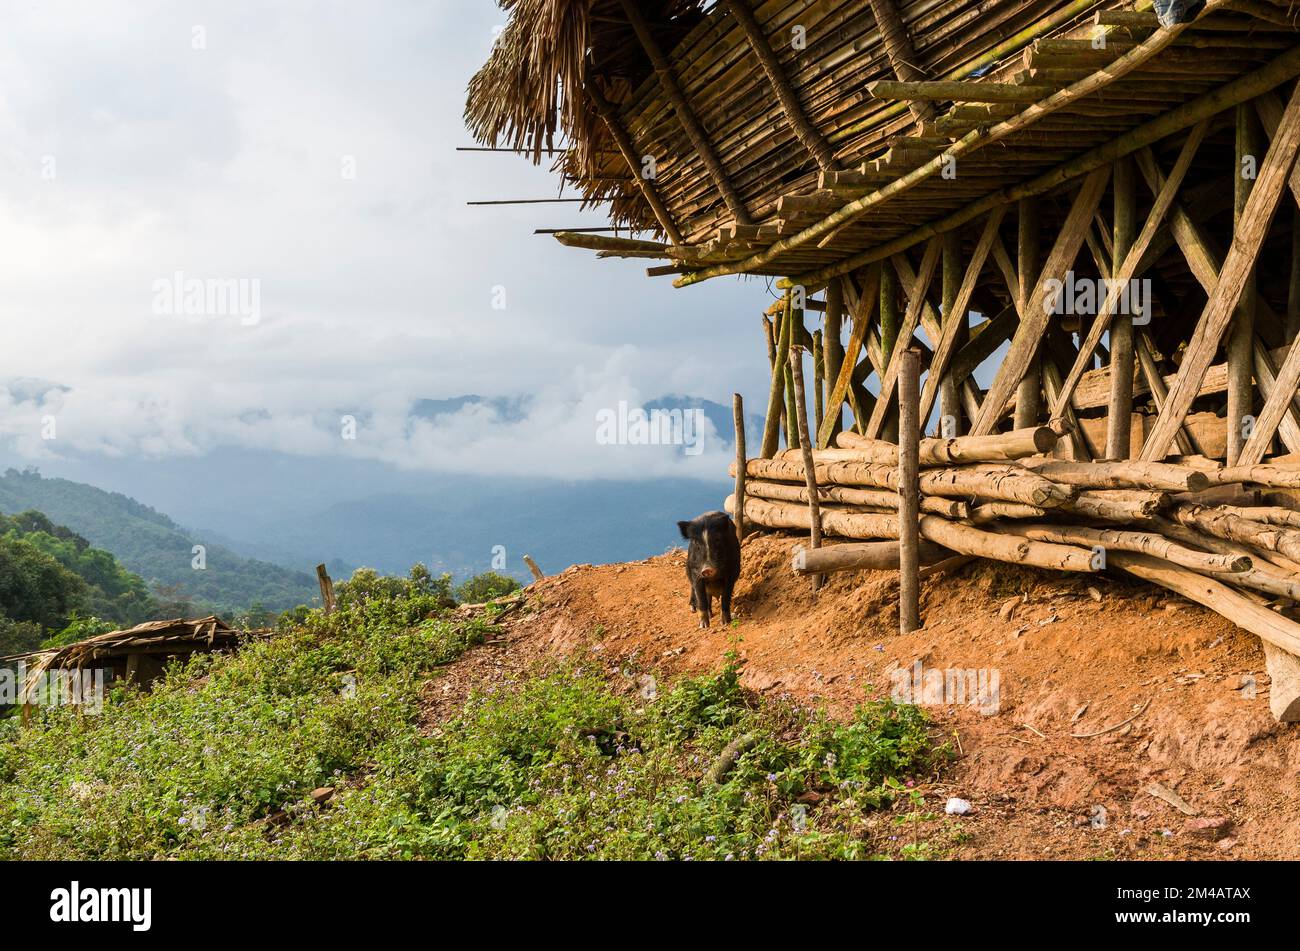 The village Kombo of the Adi Gallo-Tribe lies picturesque in the hills of Arunachal Pradesh Stock Photo